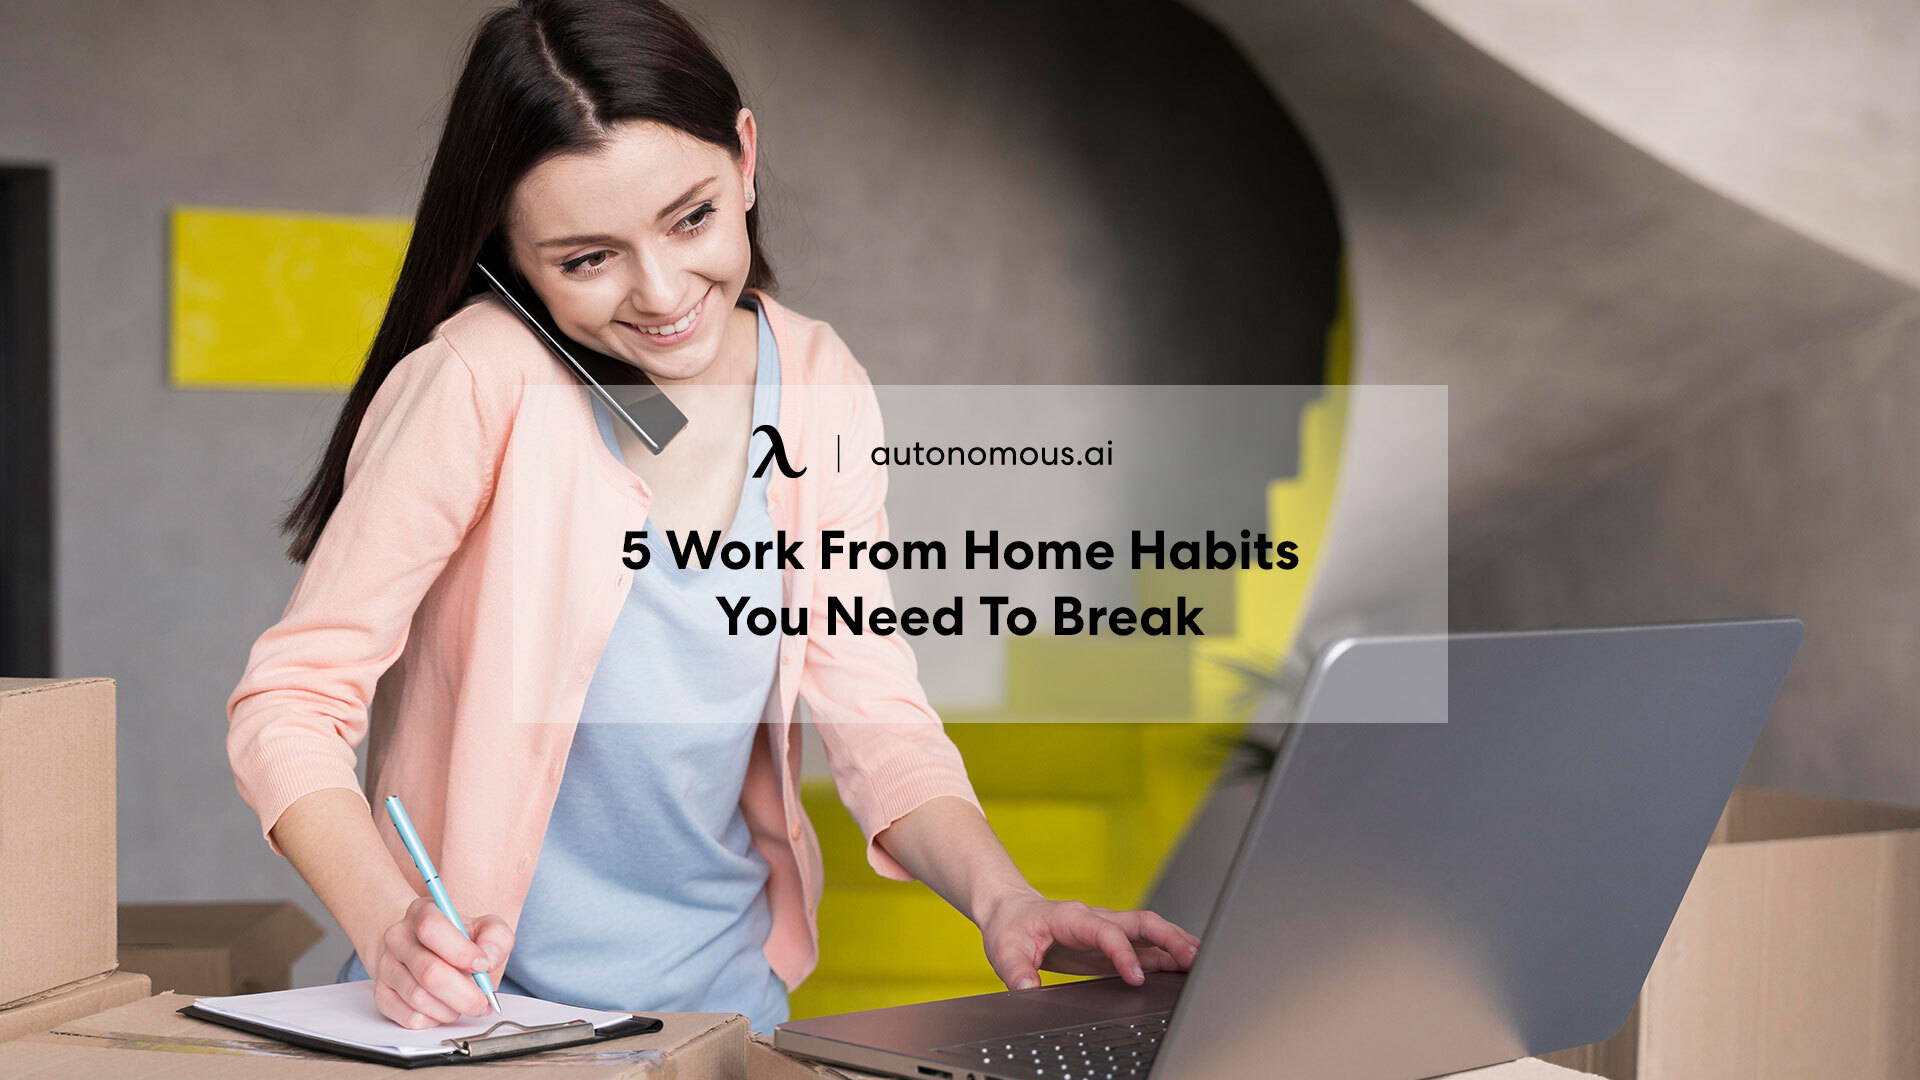 5 Bad Work From Home Habits You Need to Break